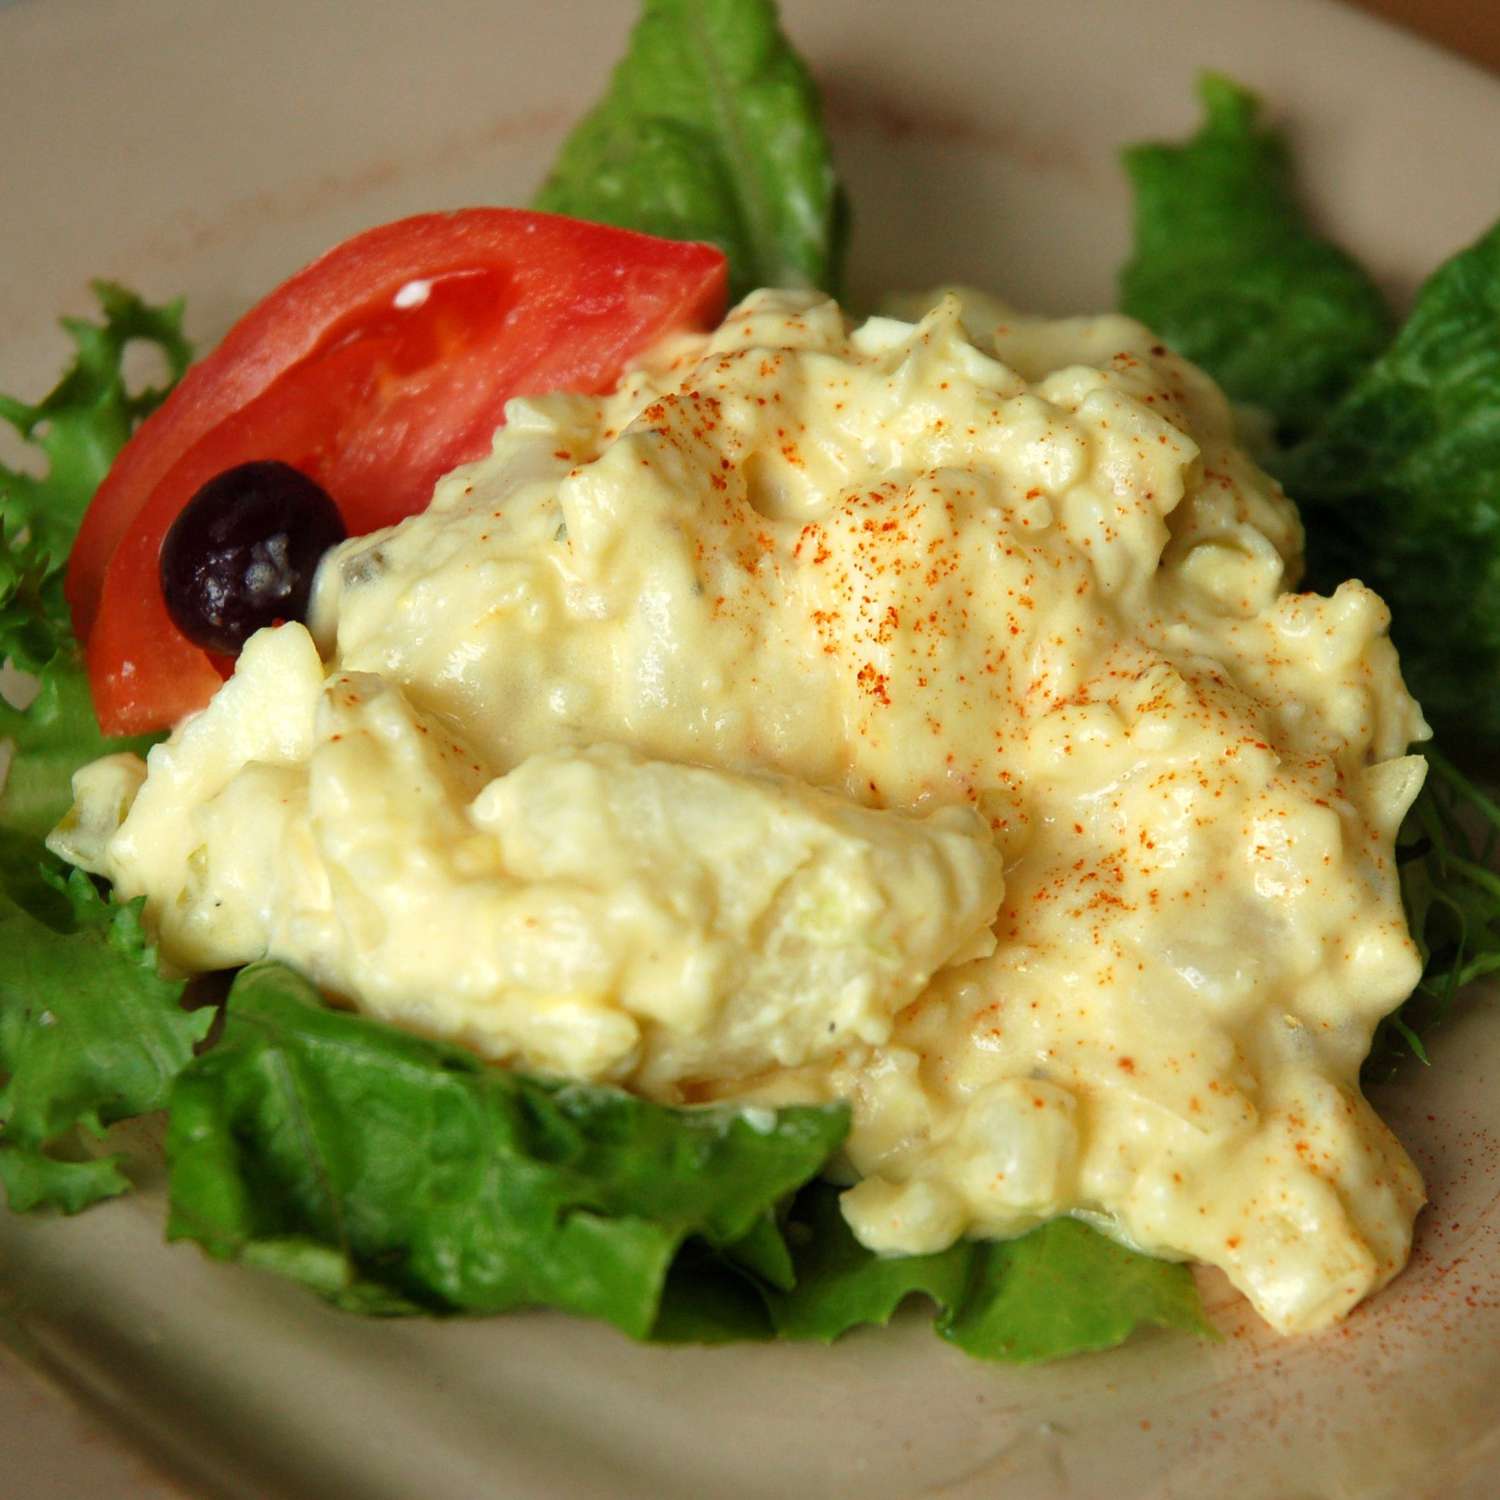 close up view of Potato Salad garnished with lettuce, tomato and a black olive